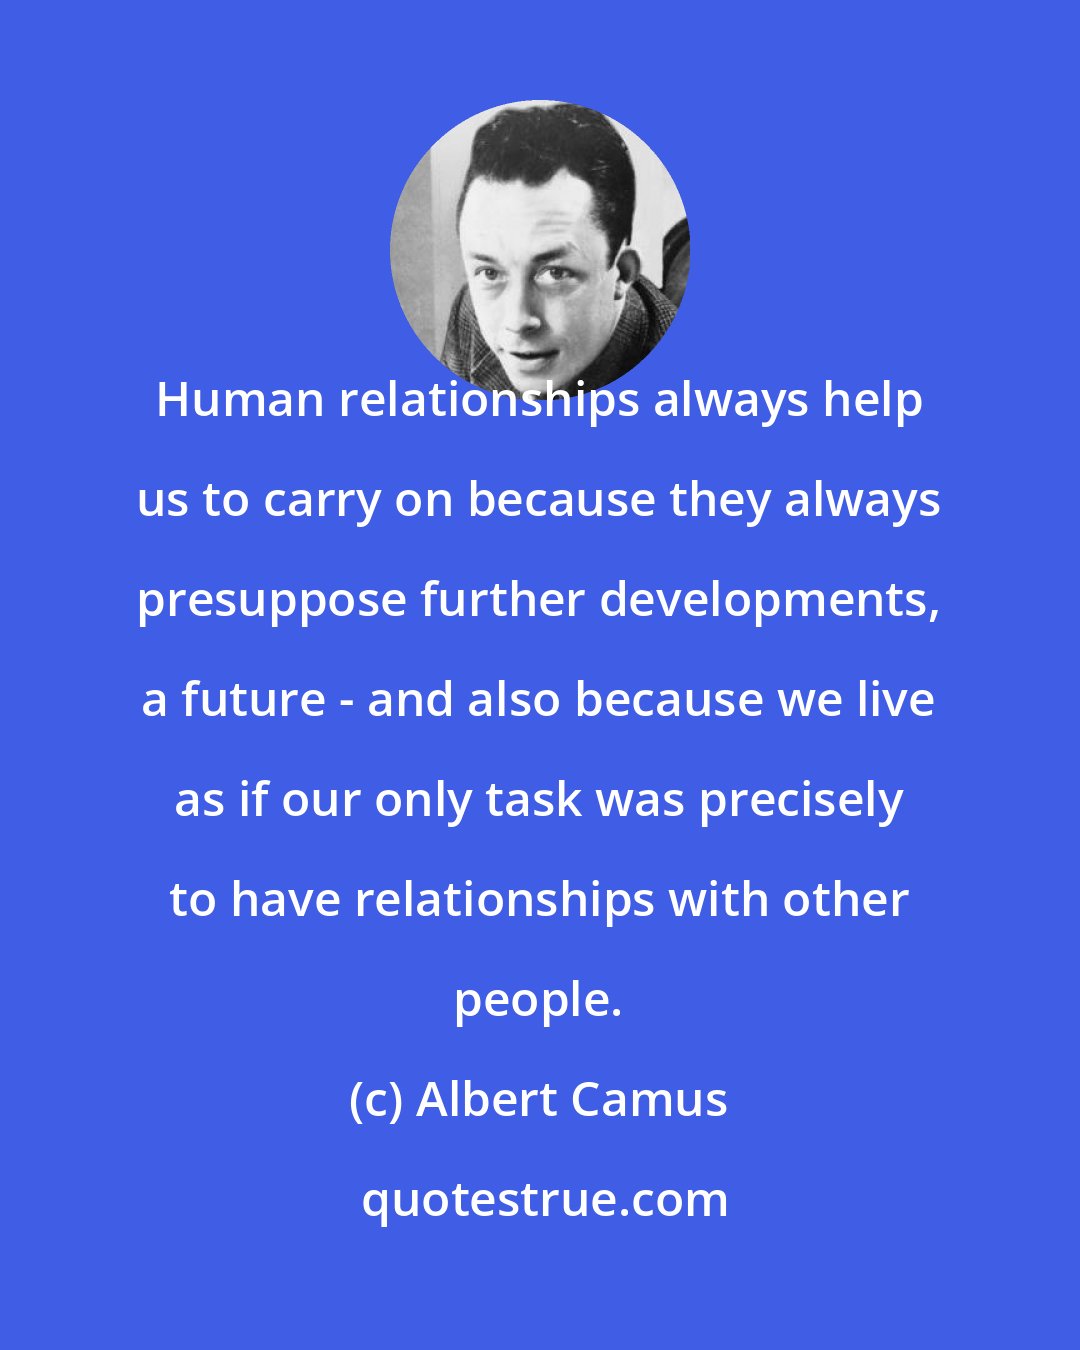 Albert Camus: Human relationships always help us to carry on because they always presuppose further developments, a future - and also because we live as if our only task was precisely to have relationships with other people.